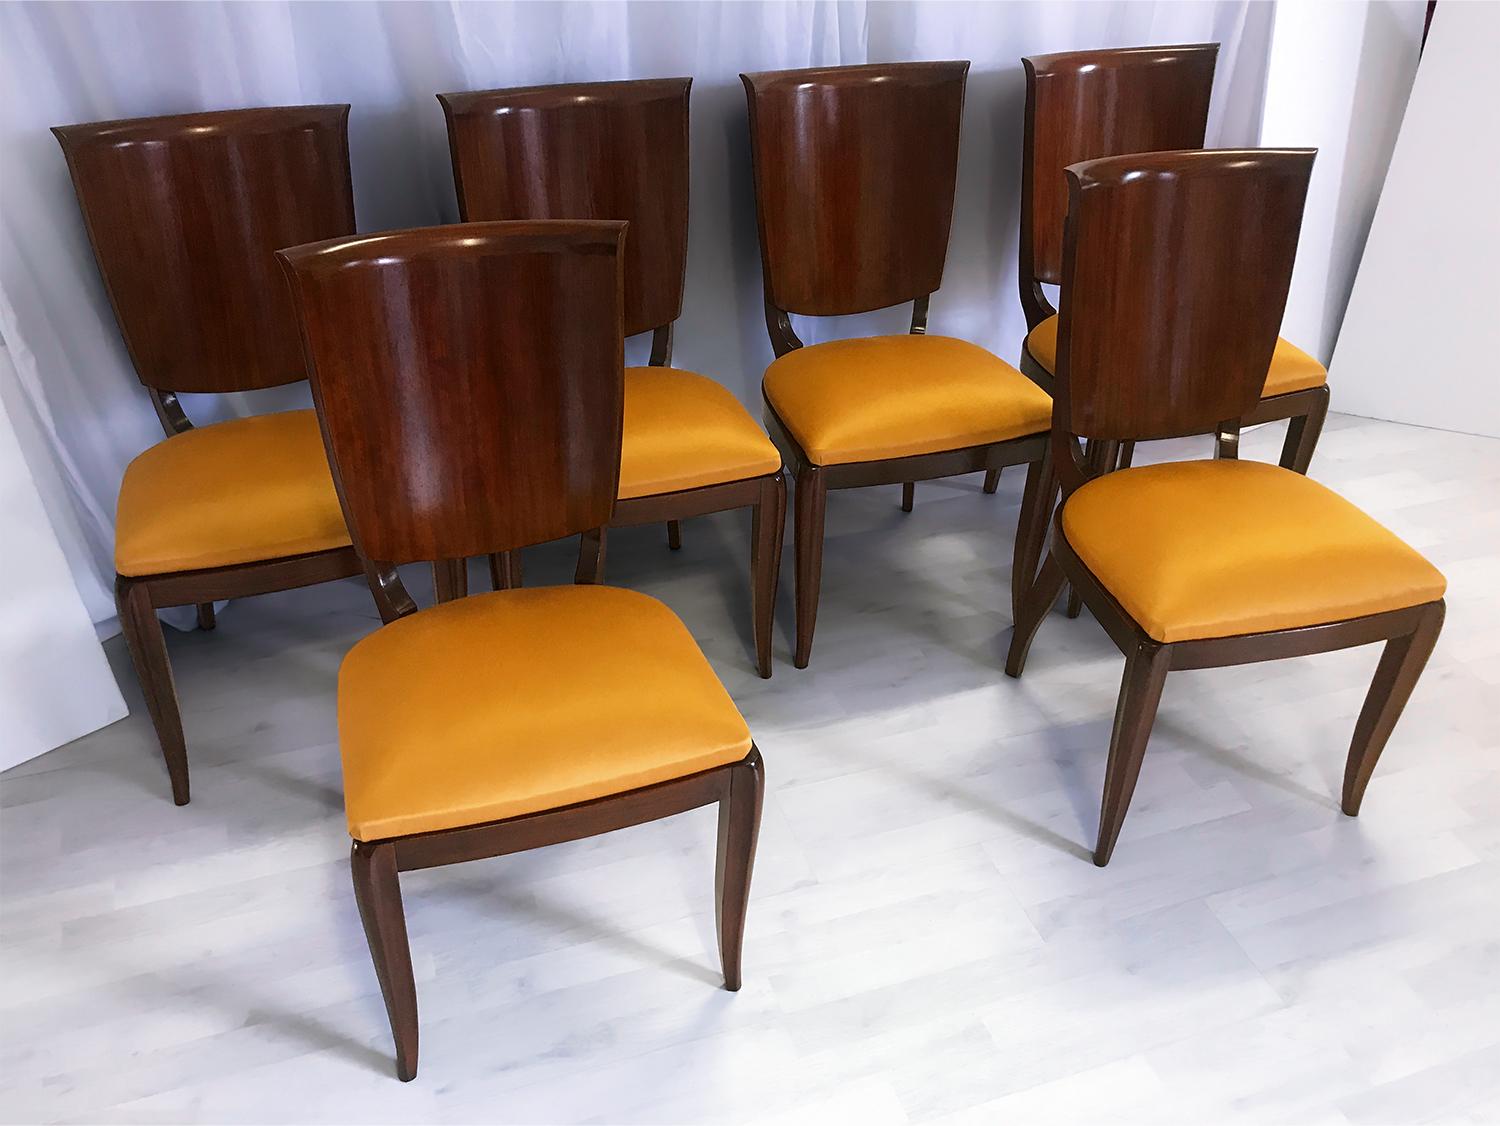 Italian Mid-Century Yellow Dining Chairs by Vittorio Dassi, Set of Six, 1950s For Sale 5